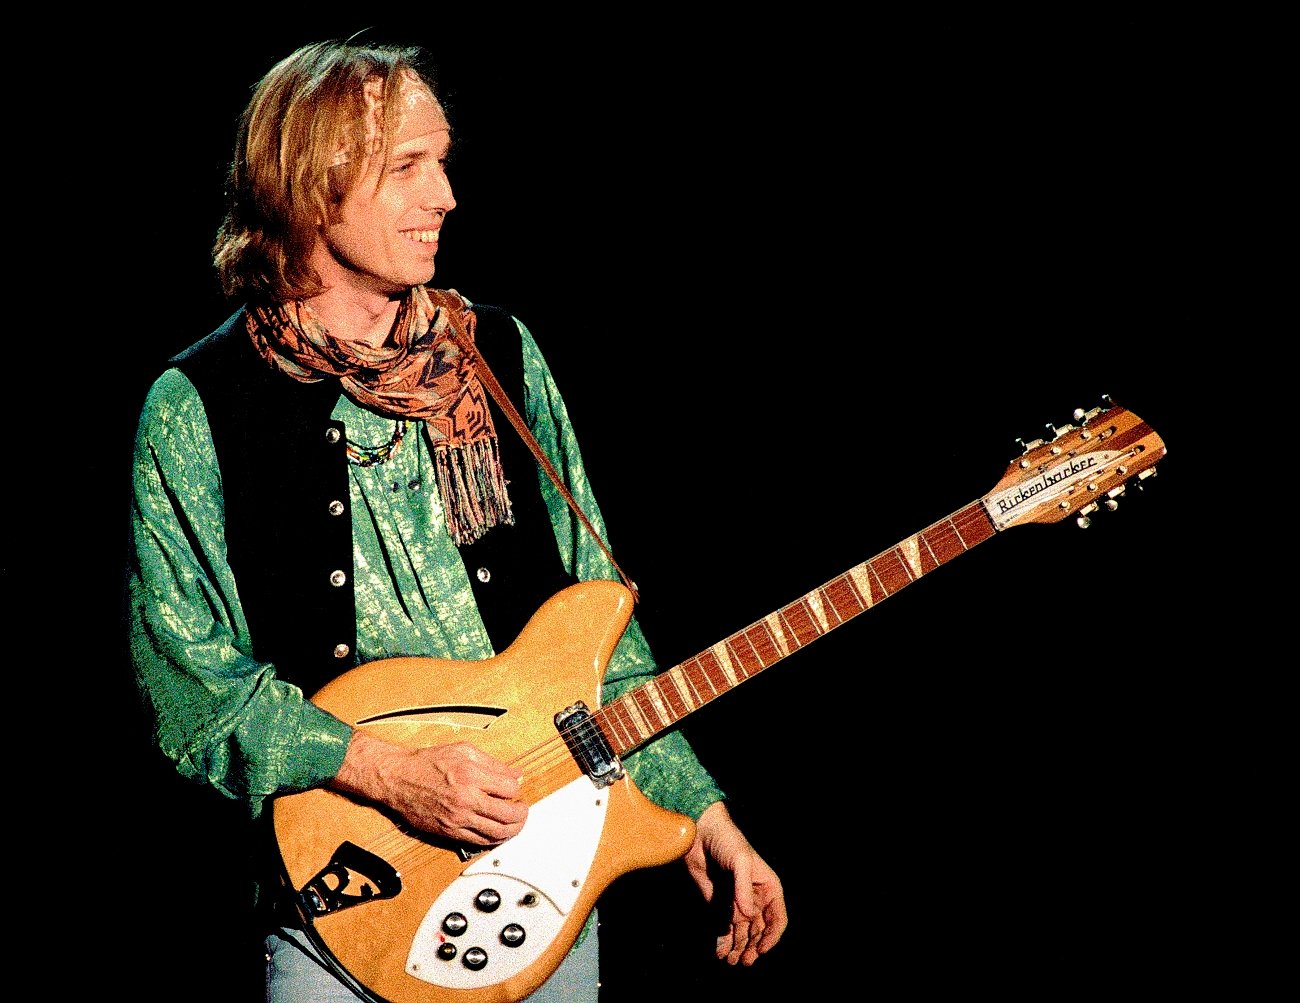 Tom Petty wears a green shirt and a vest and holds a guitar.